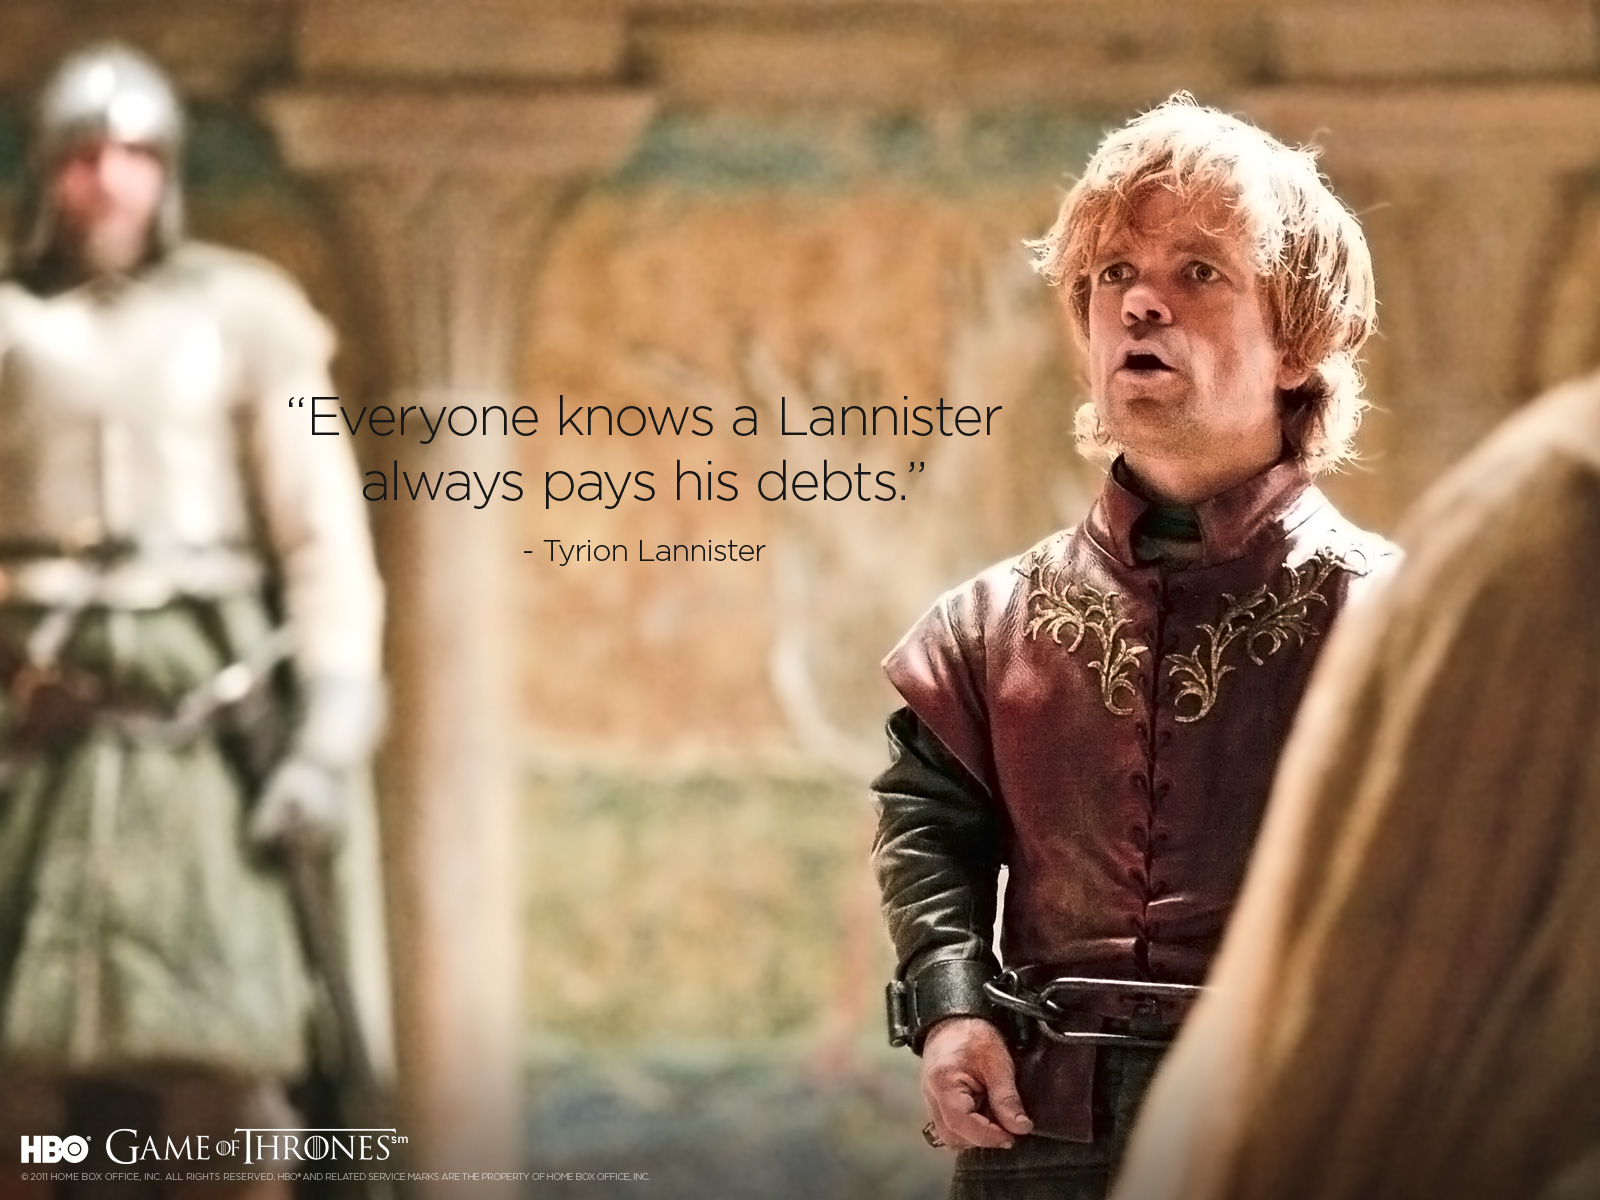 Wallpaper Full HD tv show, game of thrones, peter dinklage, tyrion lannister